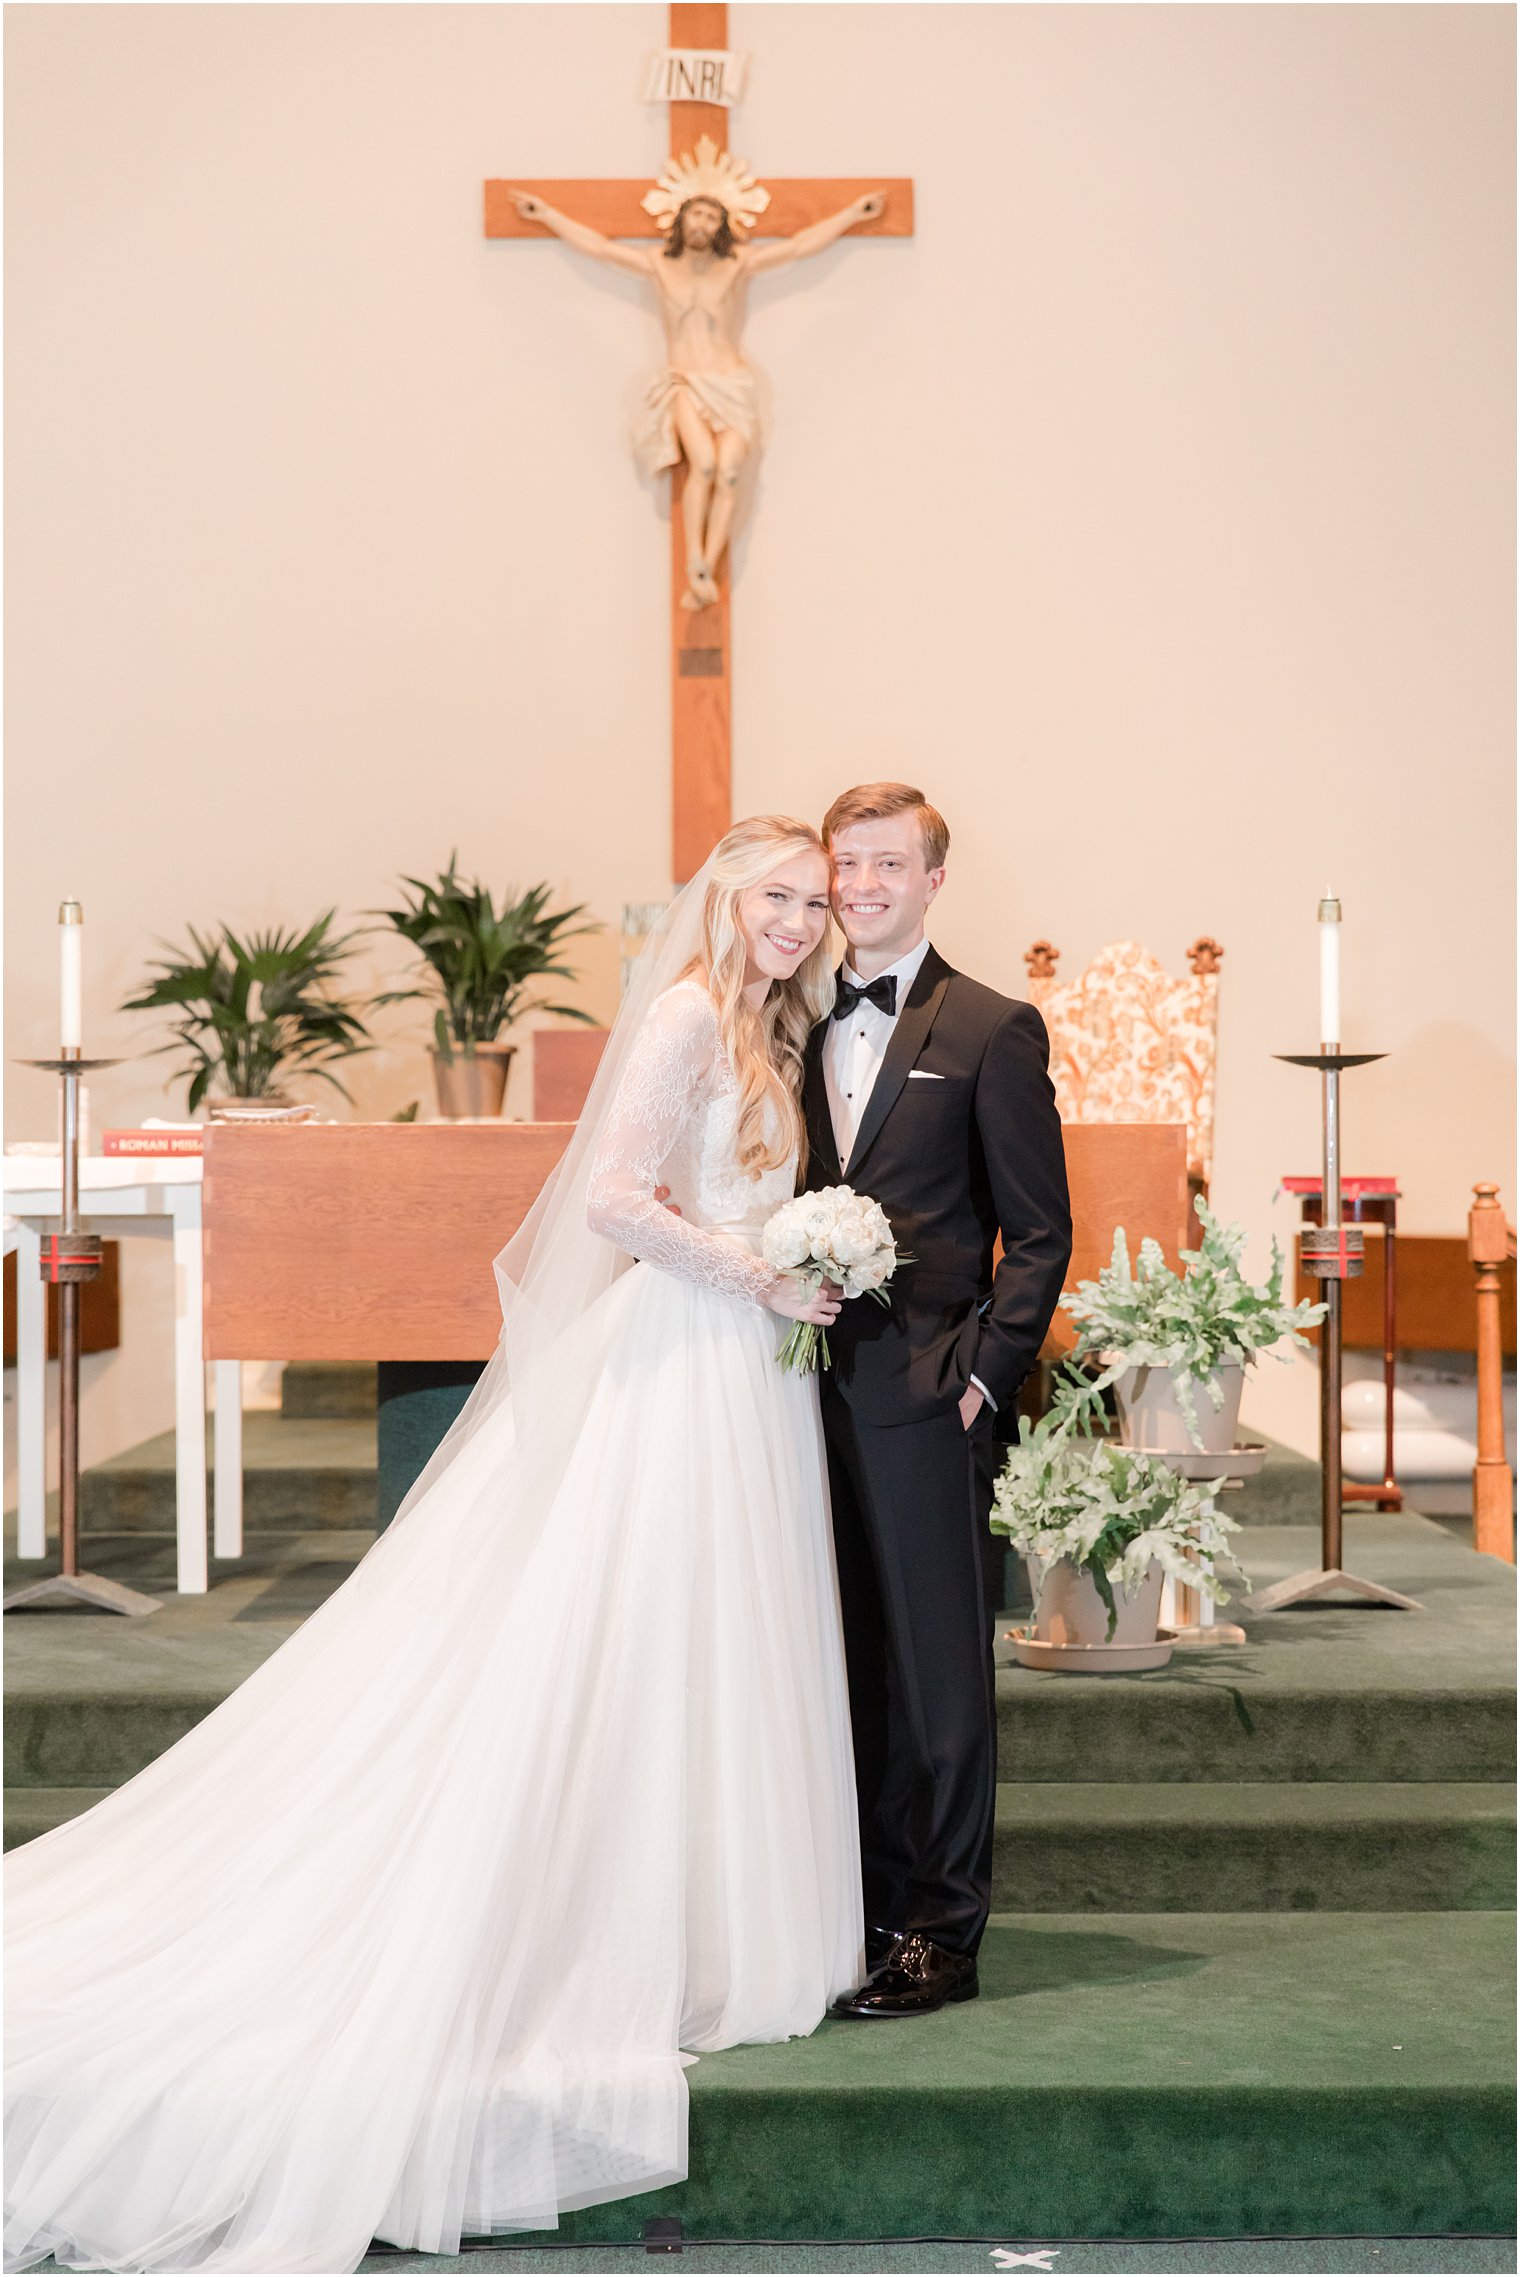 newlyweds stand together on altar in New Jersey church